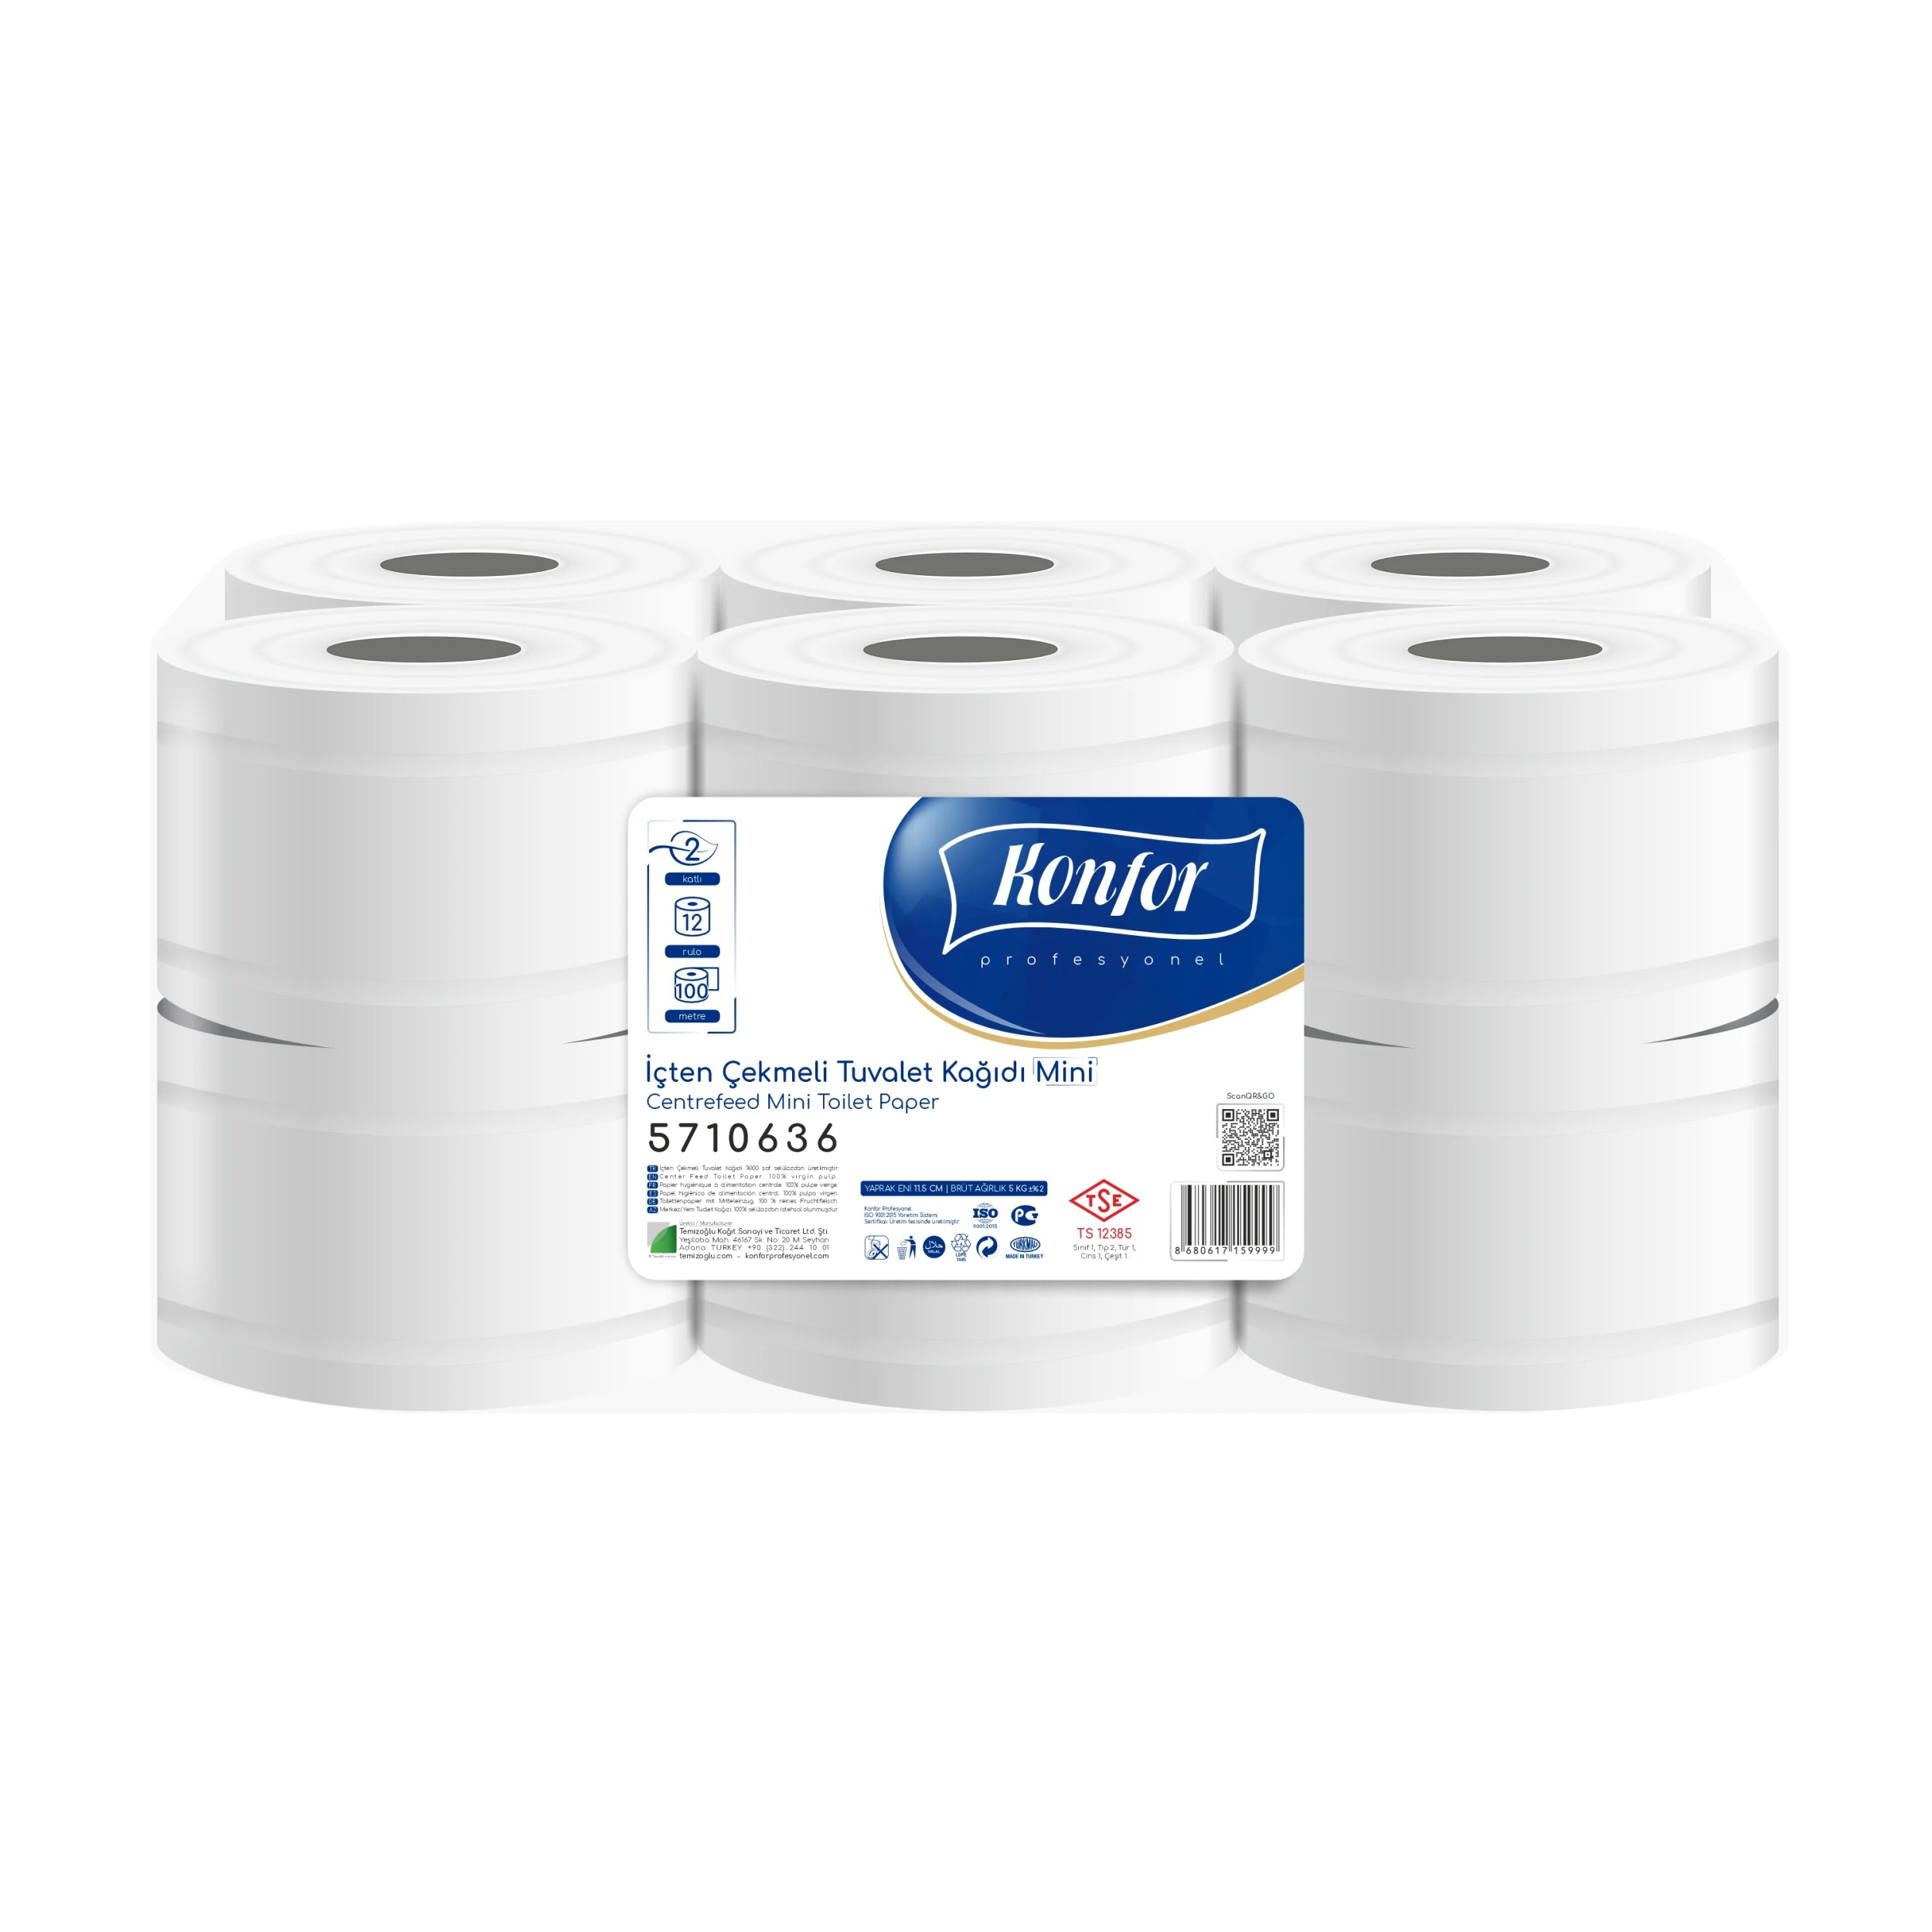 Konfor Professional Centrefeed Toilet Paper 100 m 12 Roll